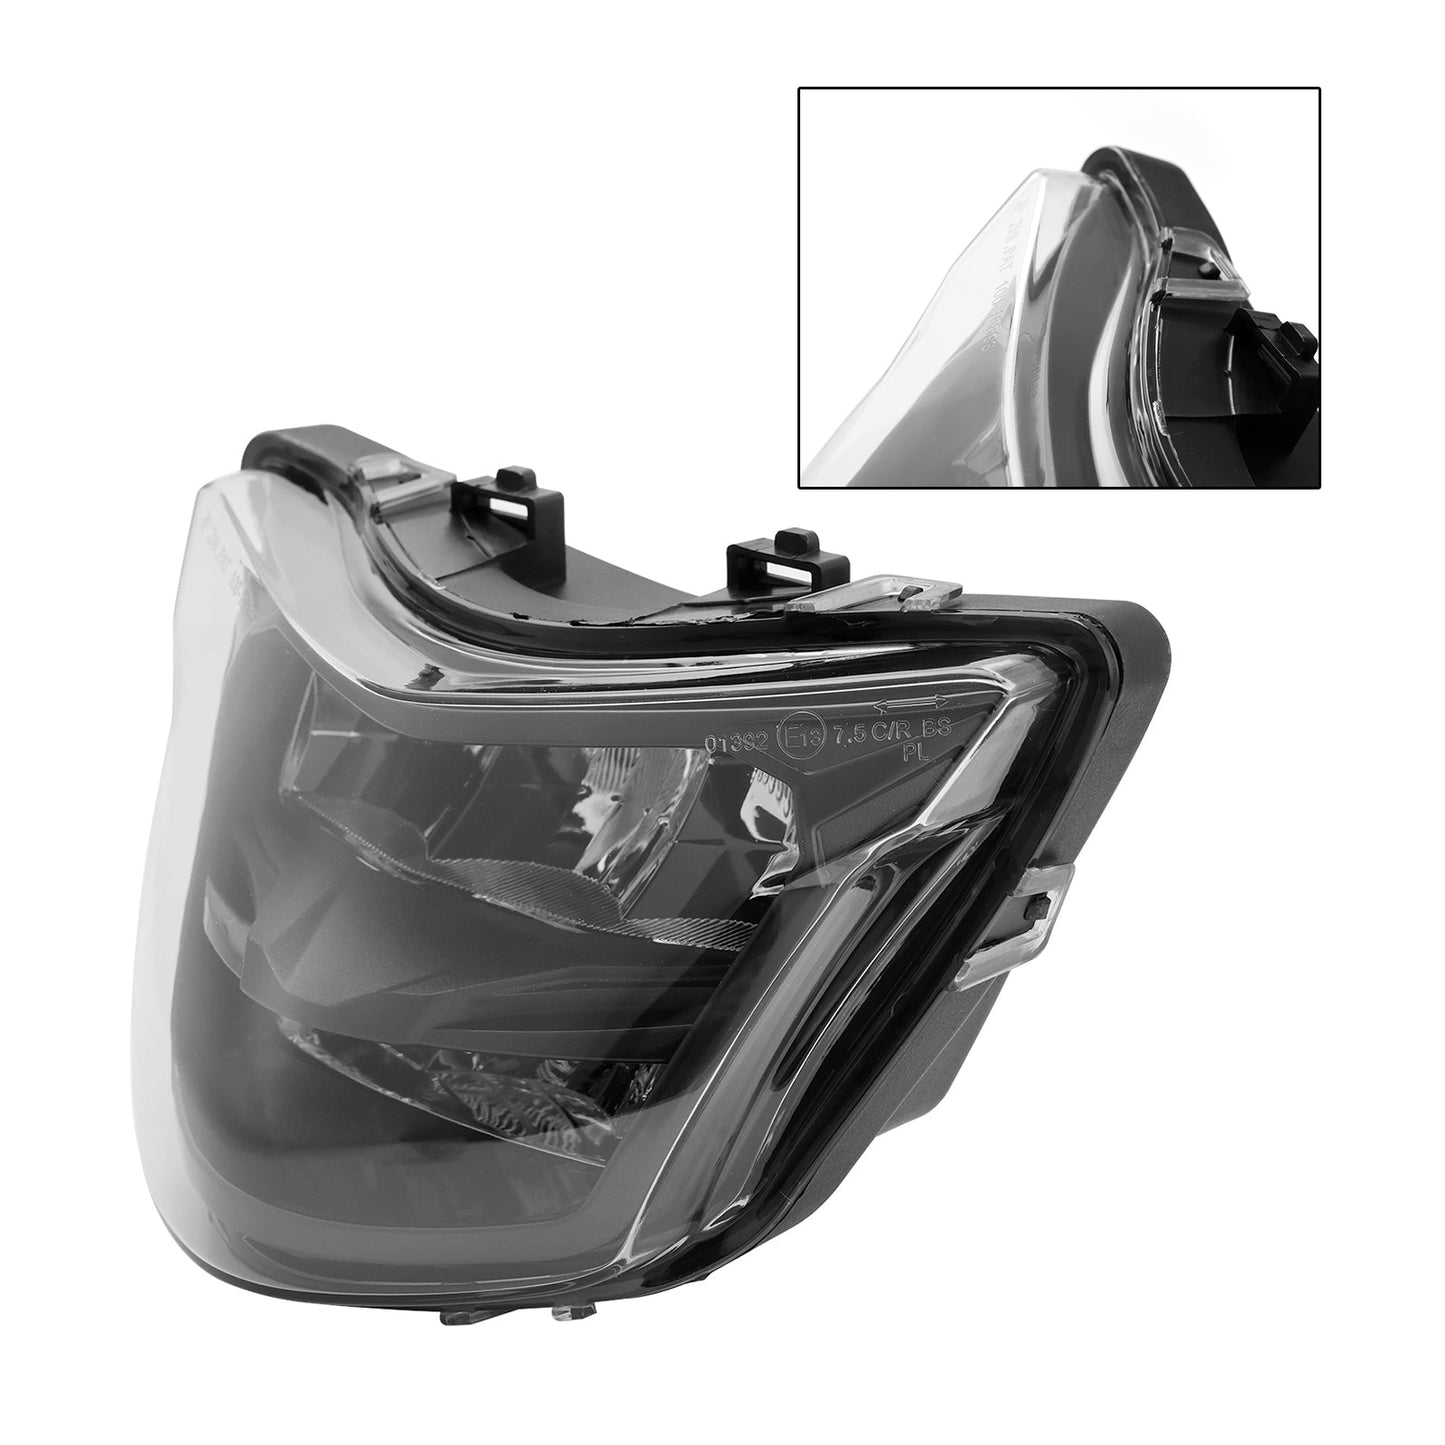 Yamaha Lc150 Y15Zr Scooter Headlamp Headlight Guard Protector Grill Led